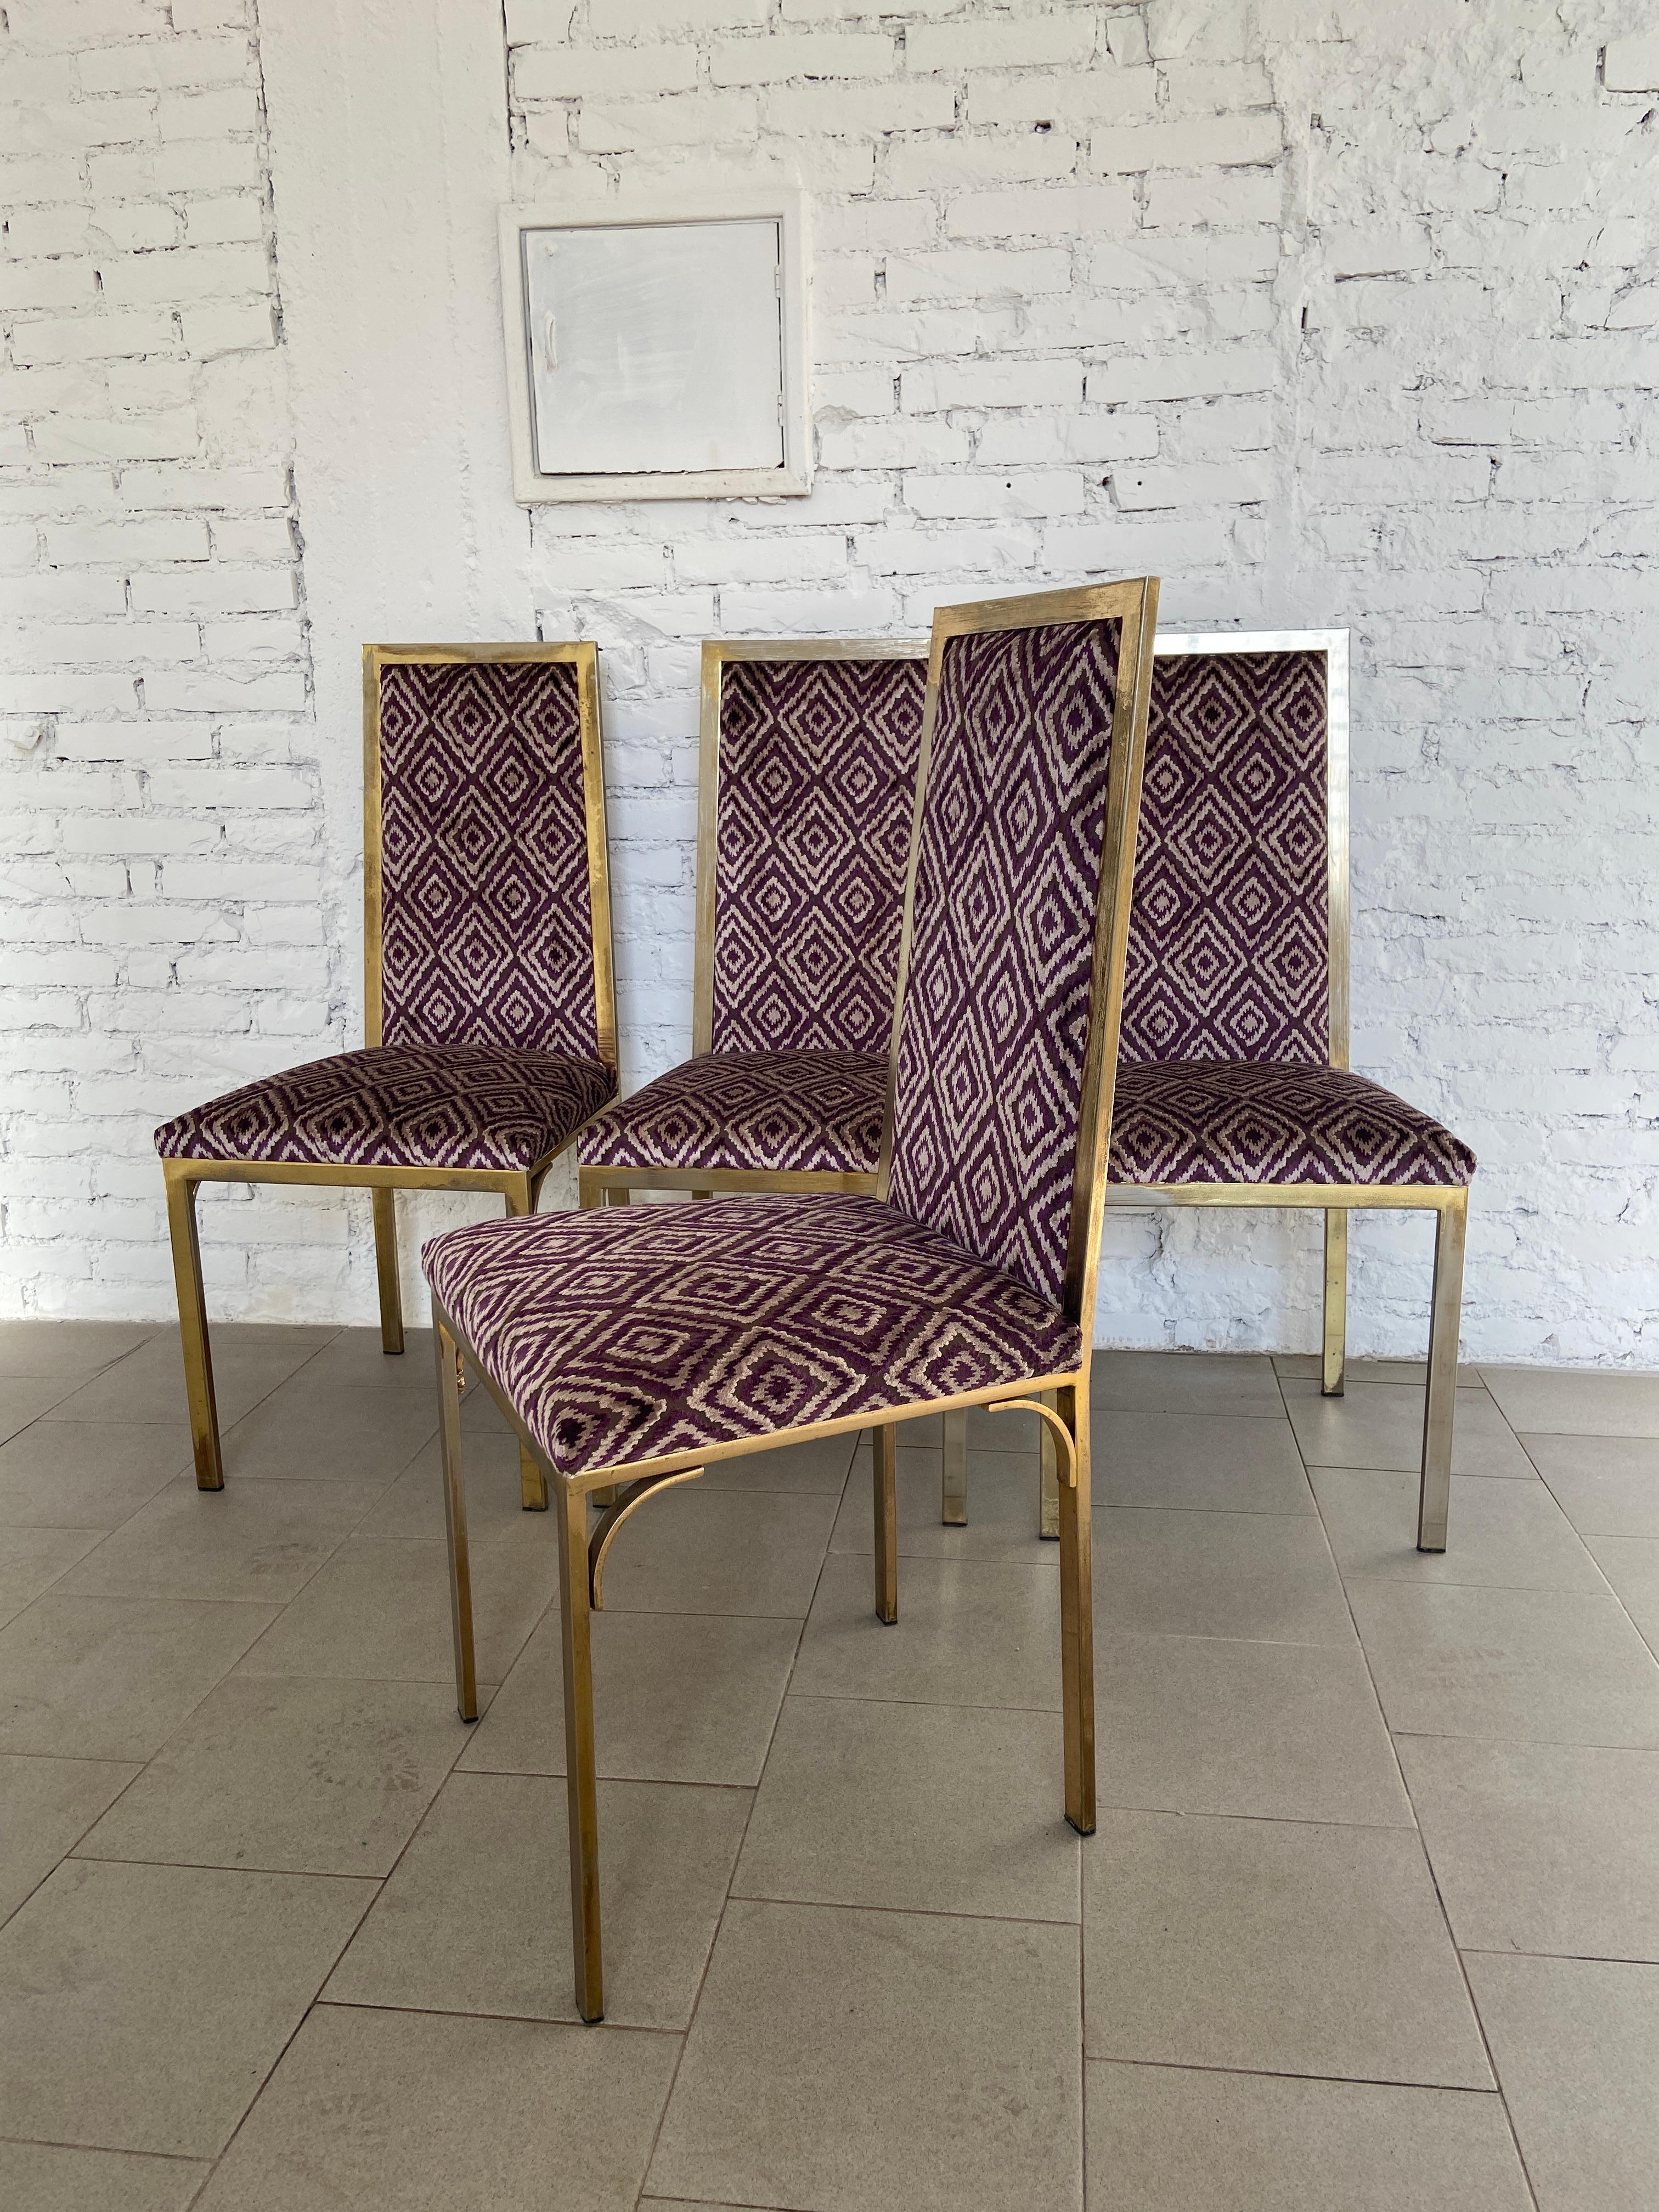 Mid-Century Modern French set of 4 gilt metal chairs in the style of Pierre Cardin reupholstered with a vintage velvet fabric from 1970s.